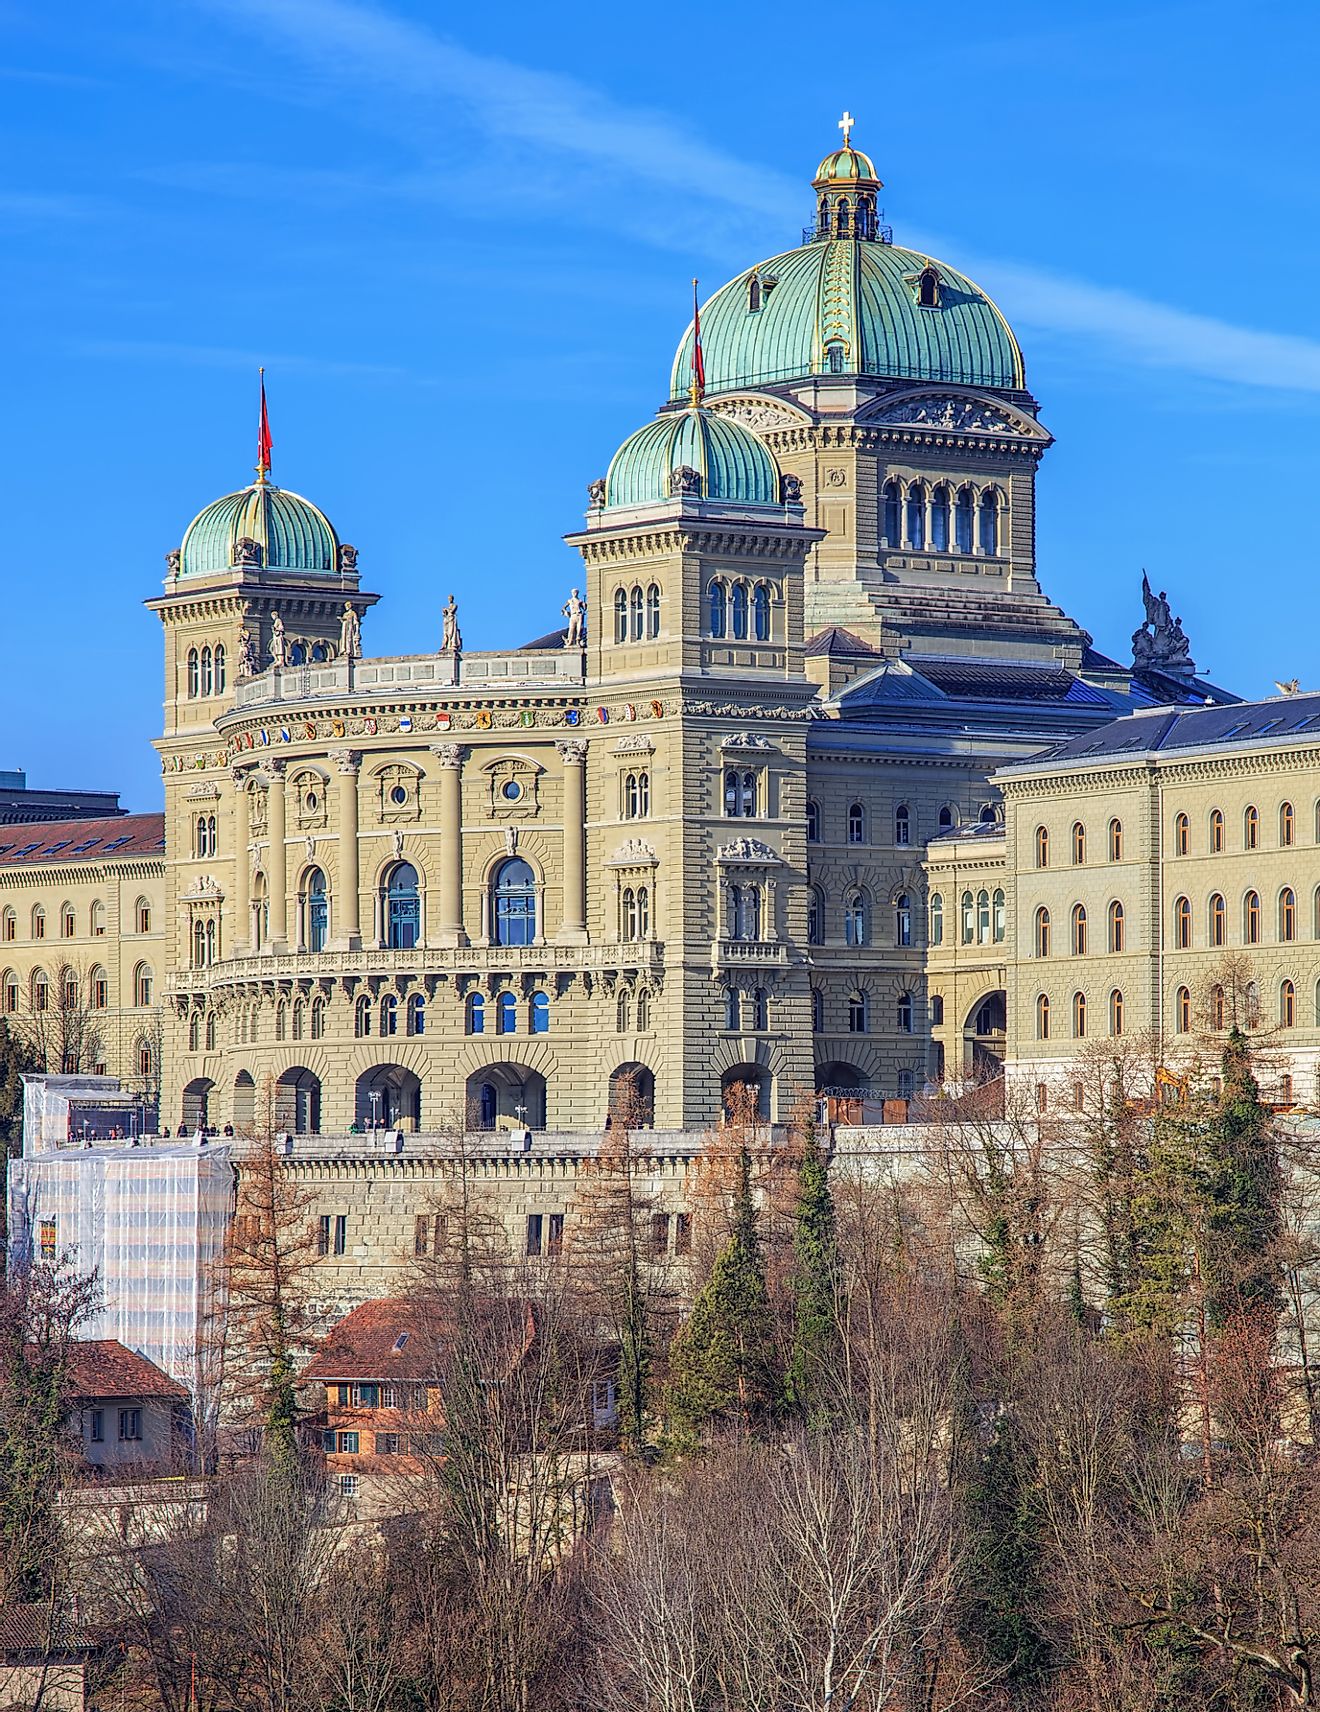 The Swiss Federal government, ranked first globally by the Prosperity Index, conducts its most important affairs within the Federal Palace in Bern.